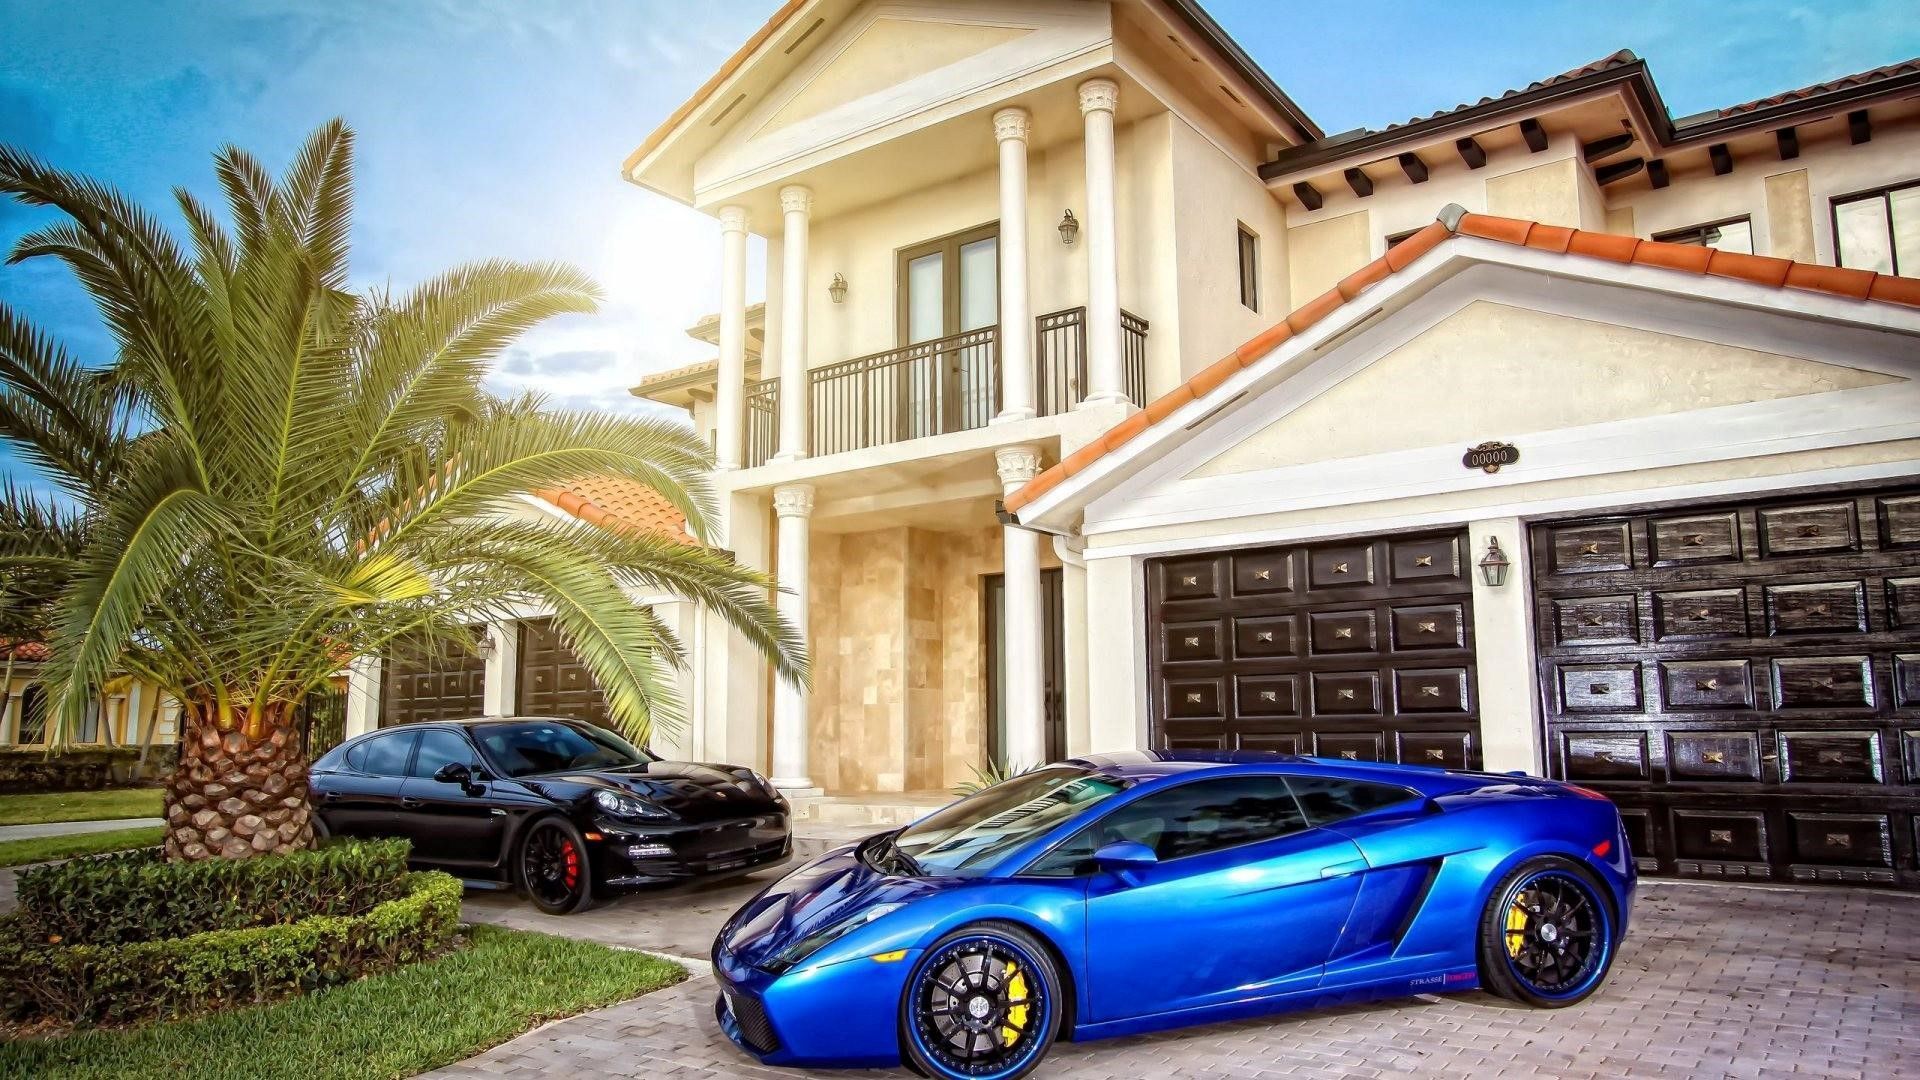 Mansion With Cars